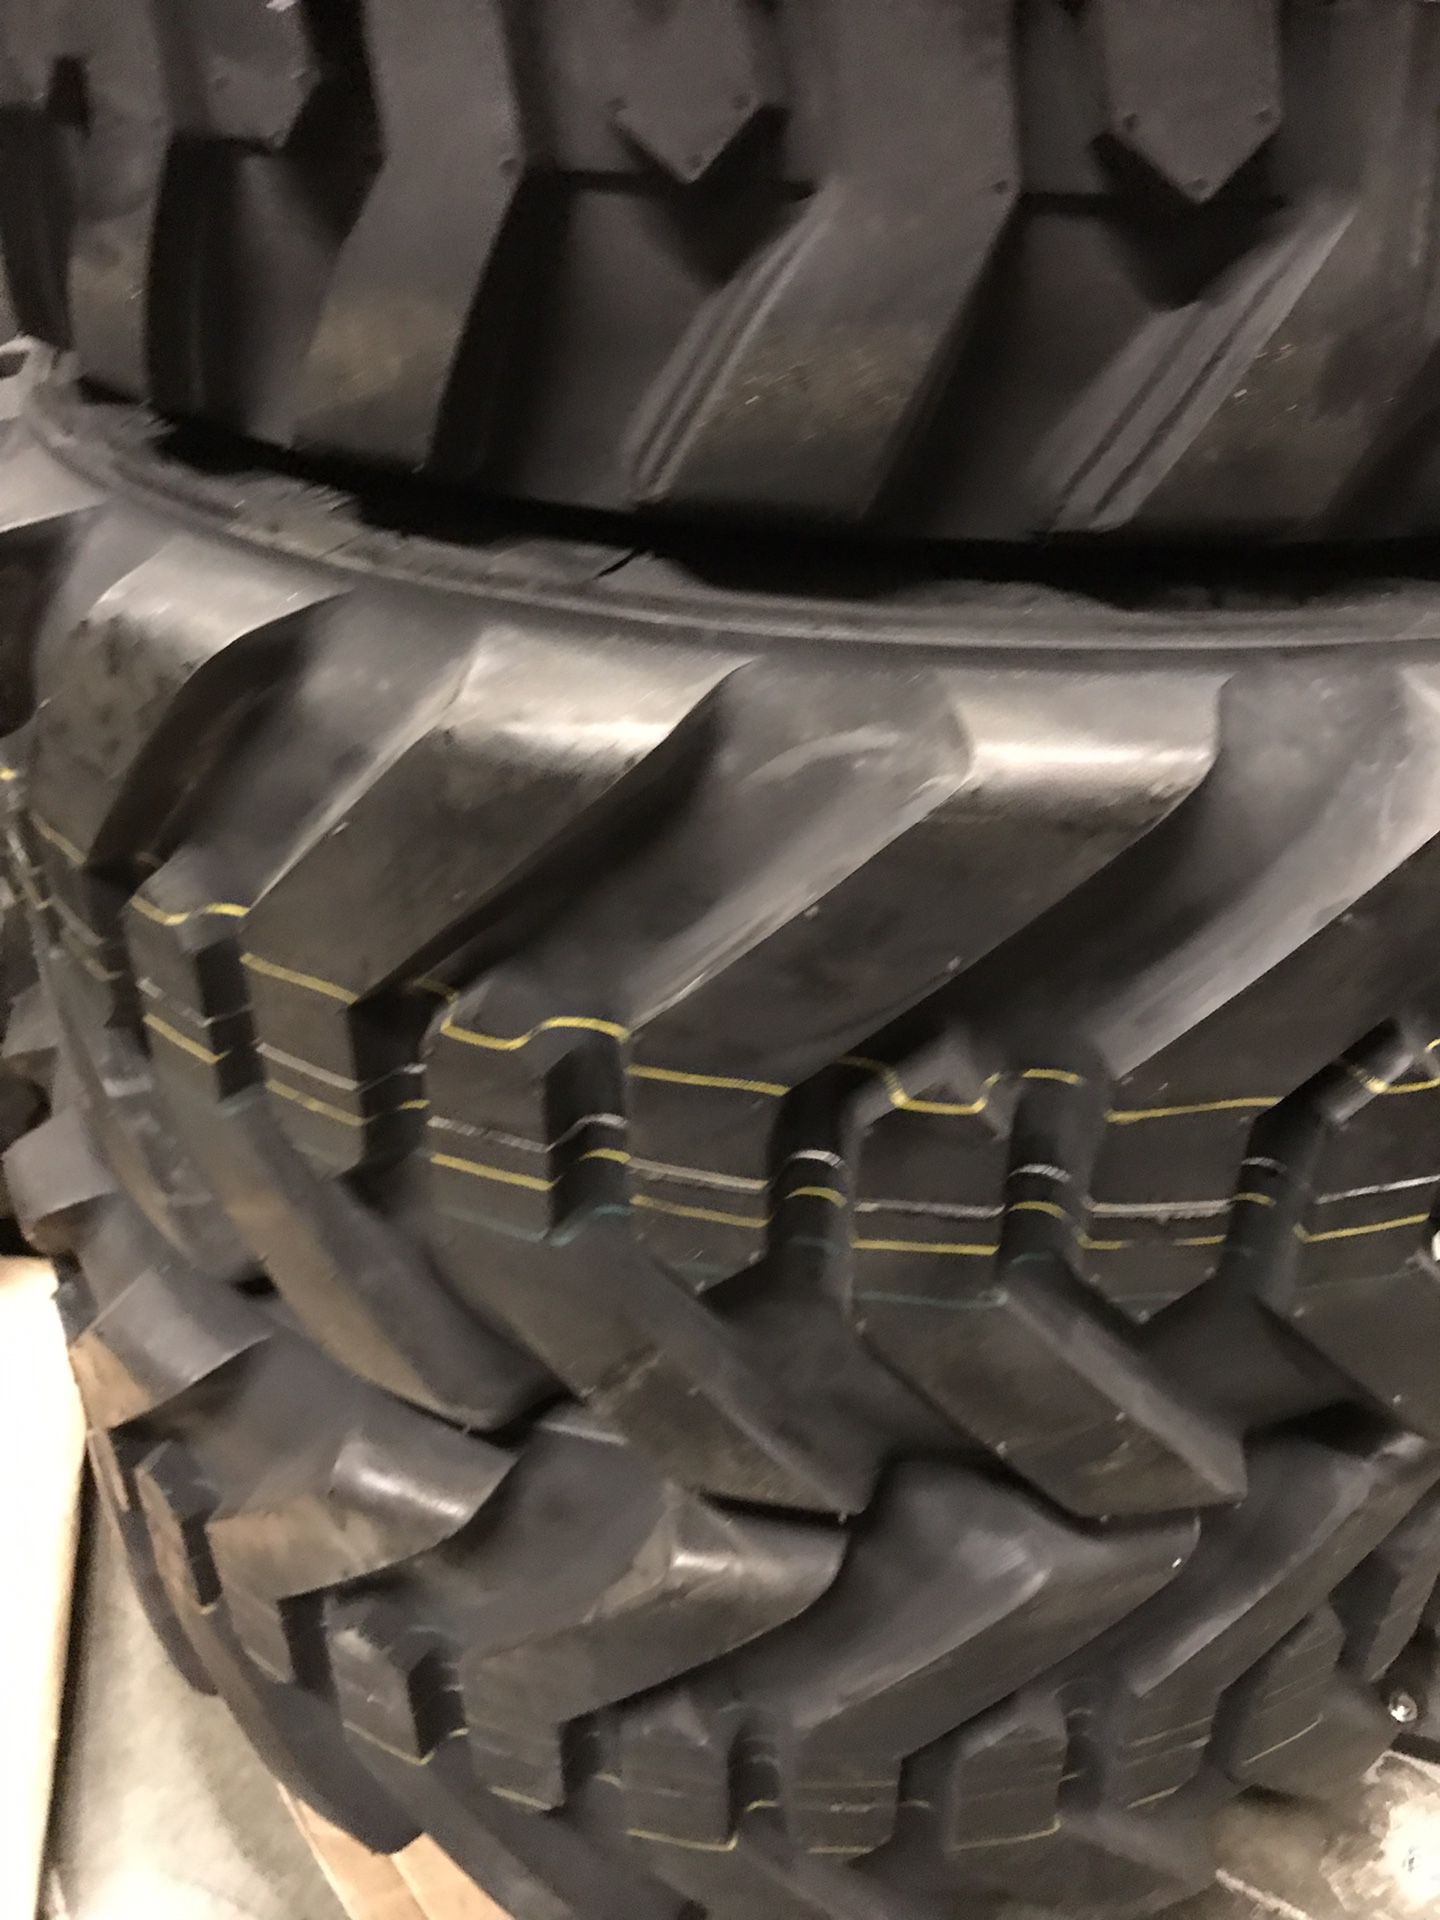 4x steer skid tire bobcat tire 10-16.5 12 ply $560 no lowball. Price is firm